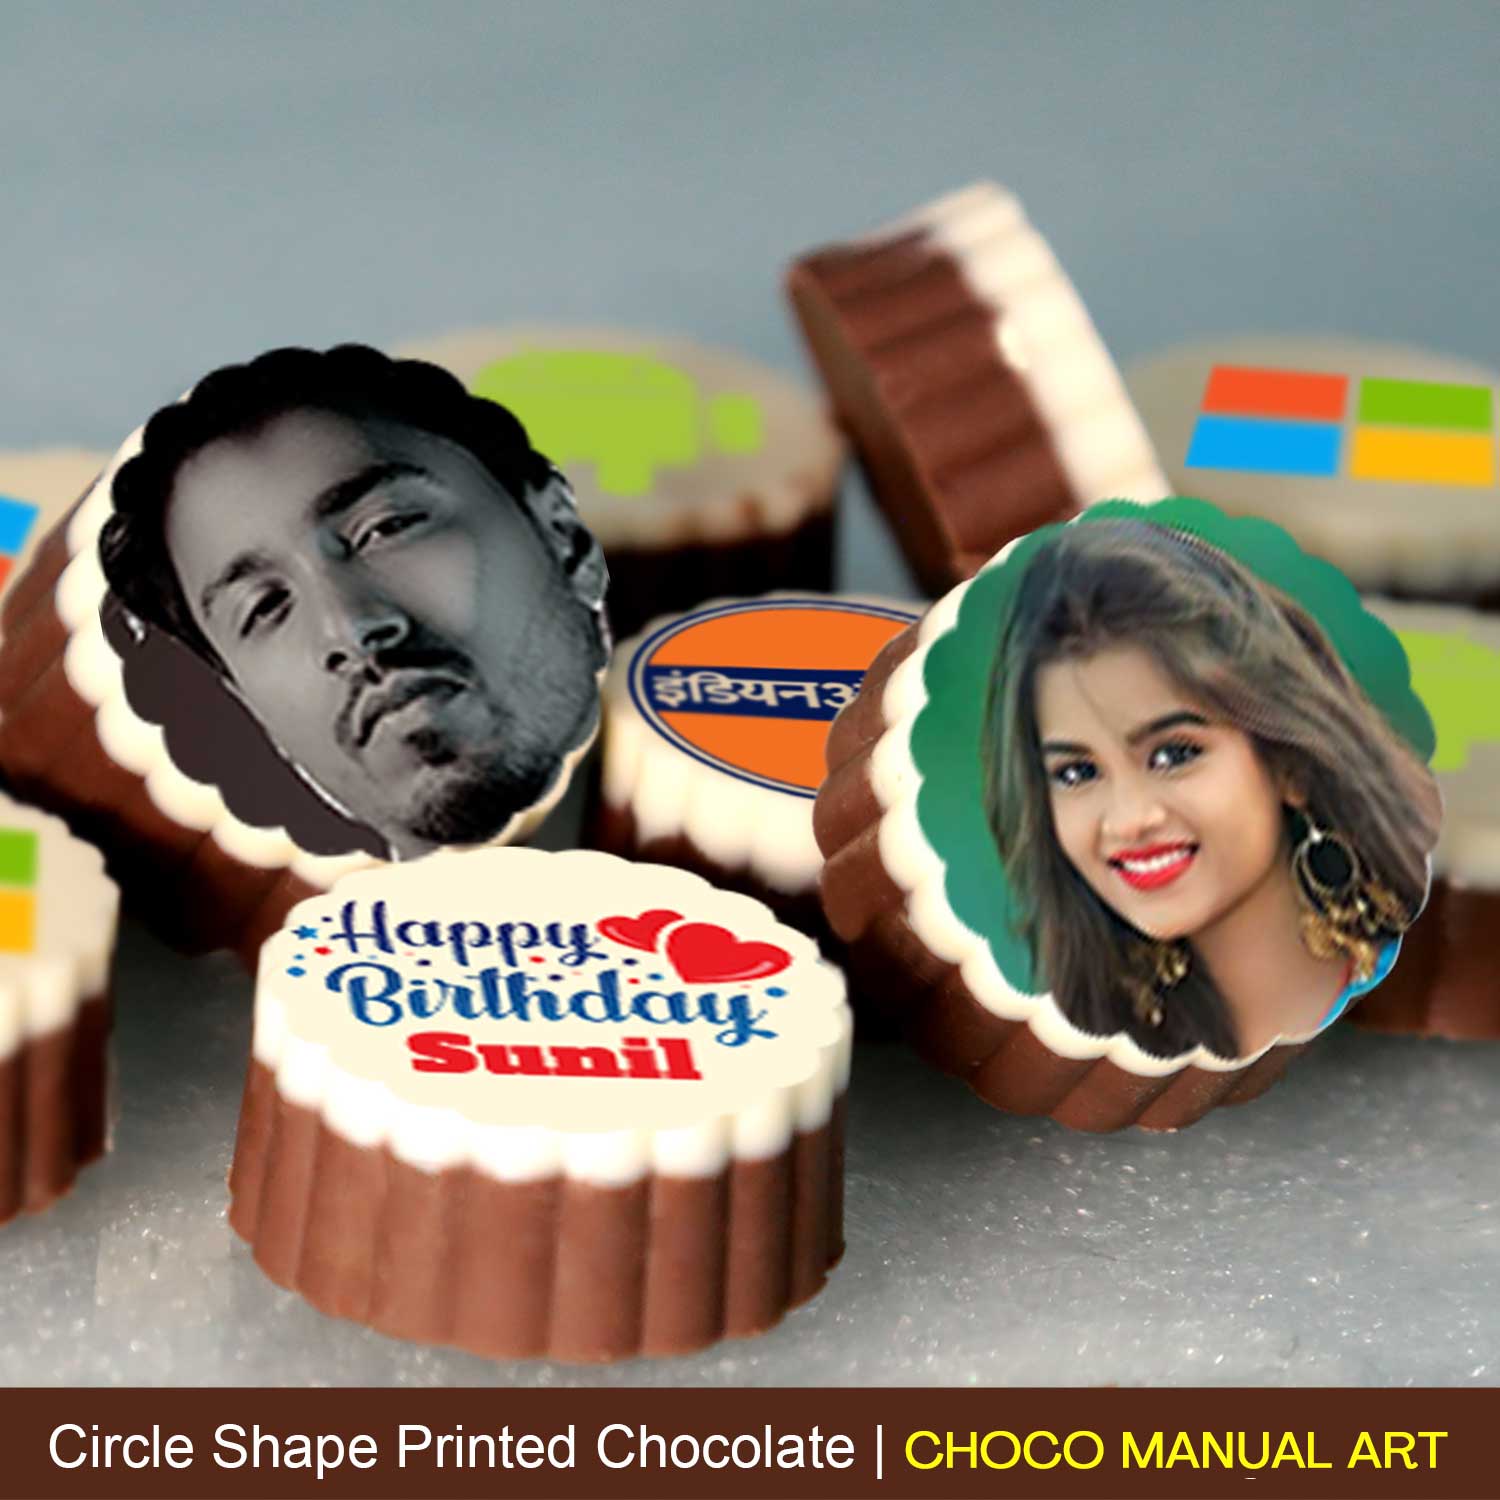 photo printed chocolate photo on chocolate wrappers personalised chocolate corporate gifts personalised chocolates with names personalized chocolate gifts personalised chocolates with photo india personalized chocolate box personalised chocolates for birthdays